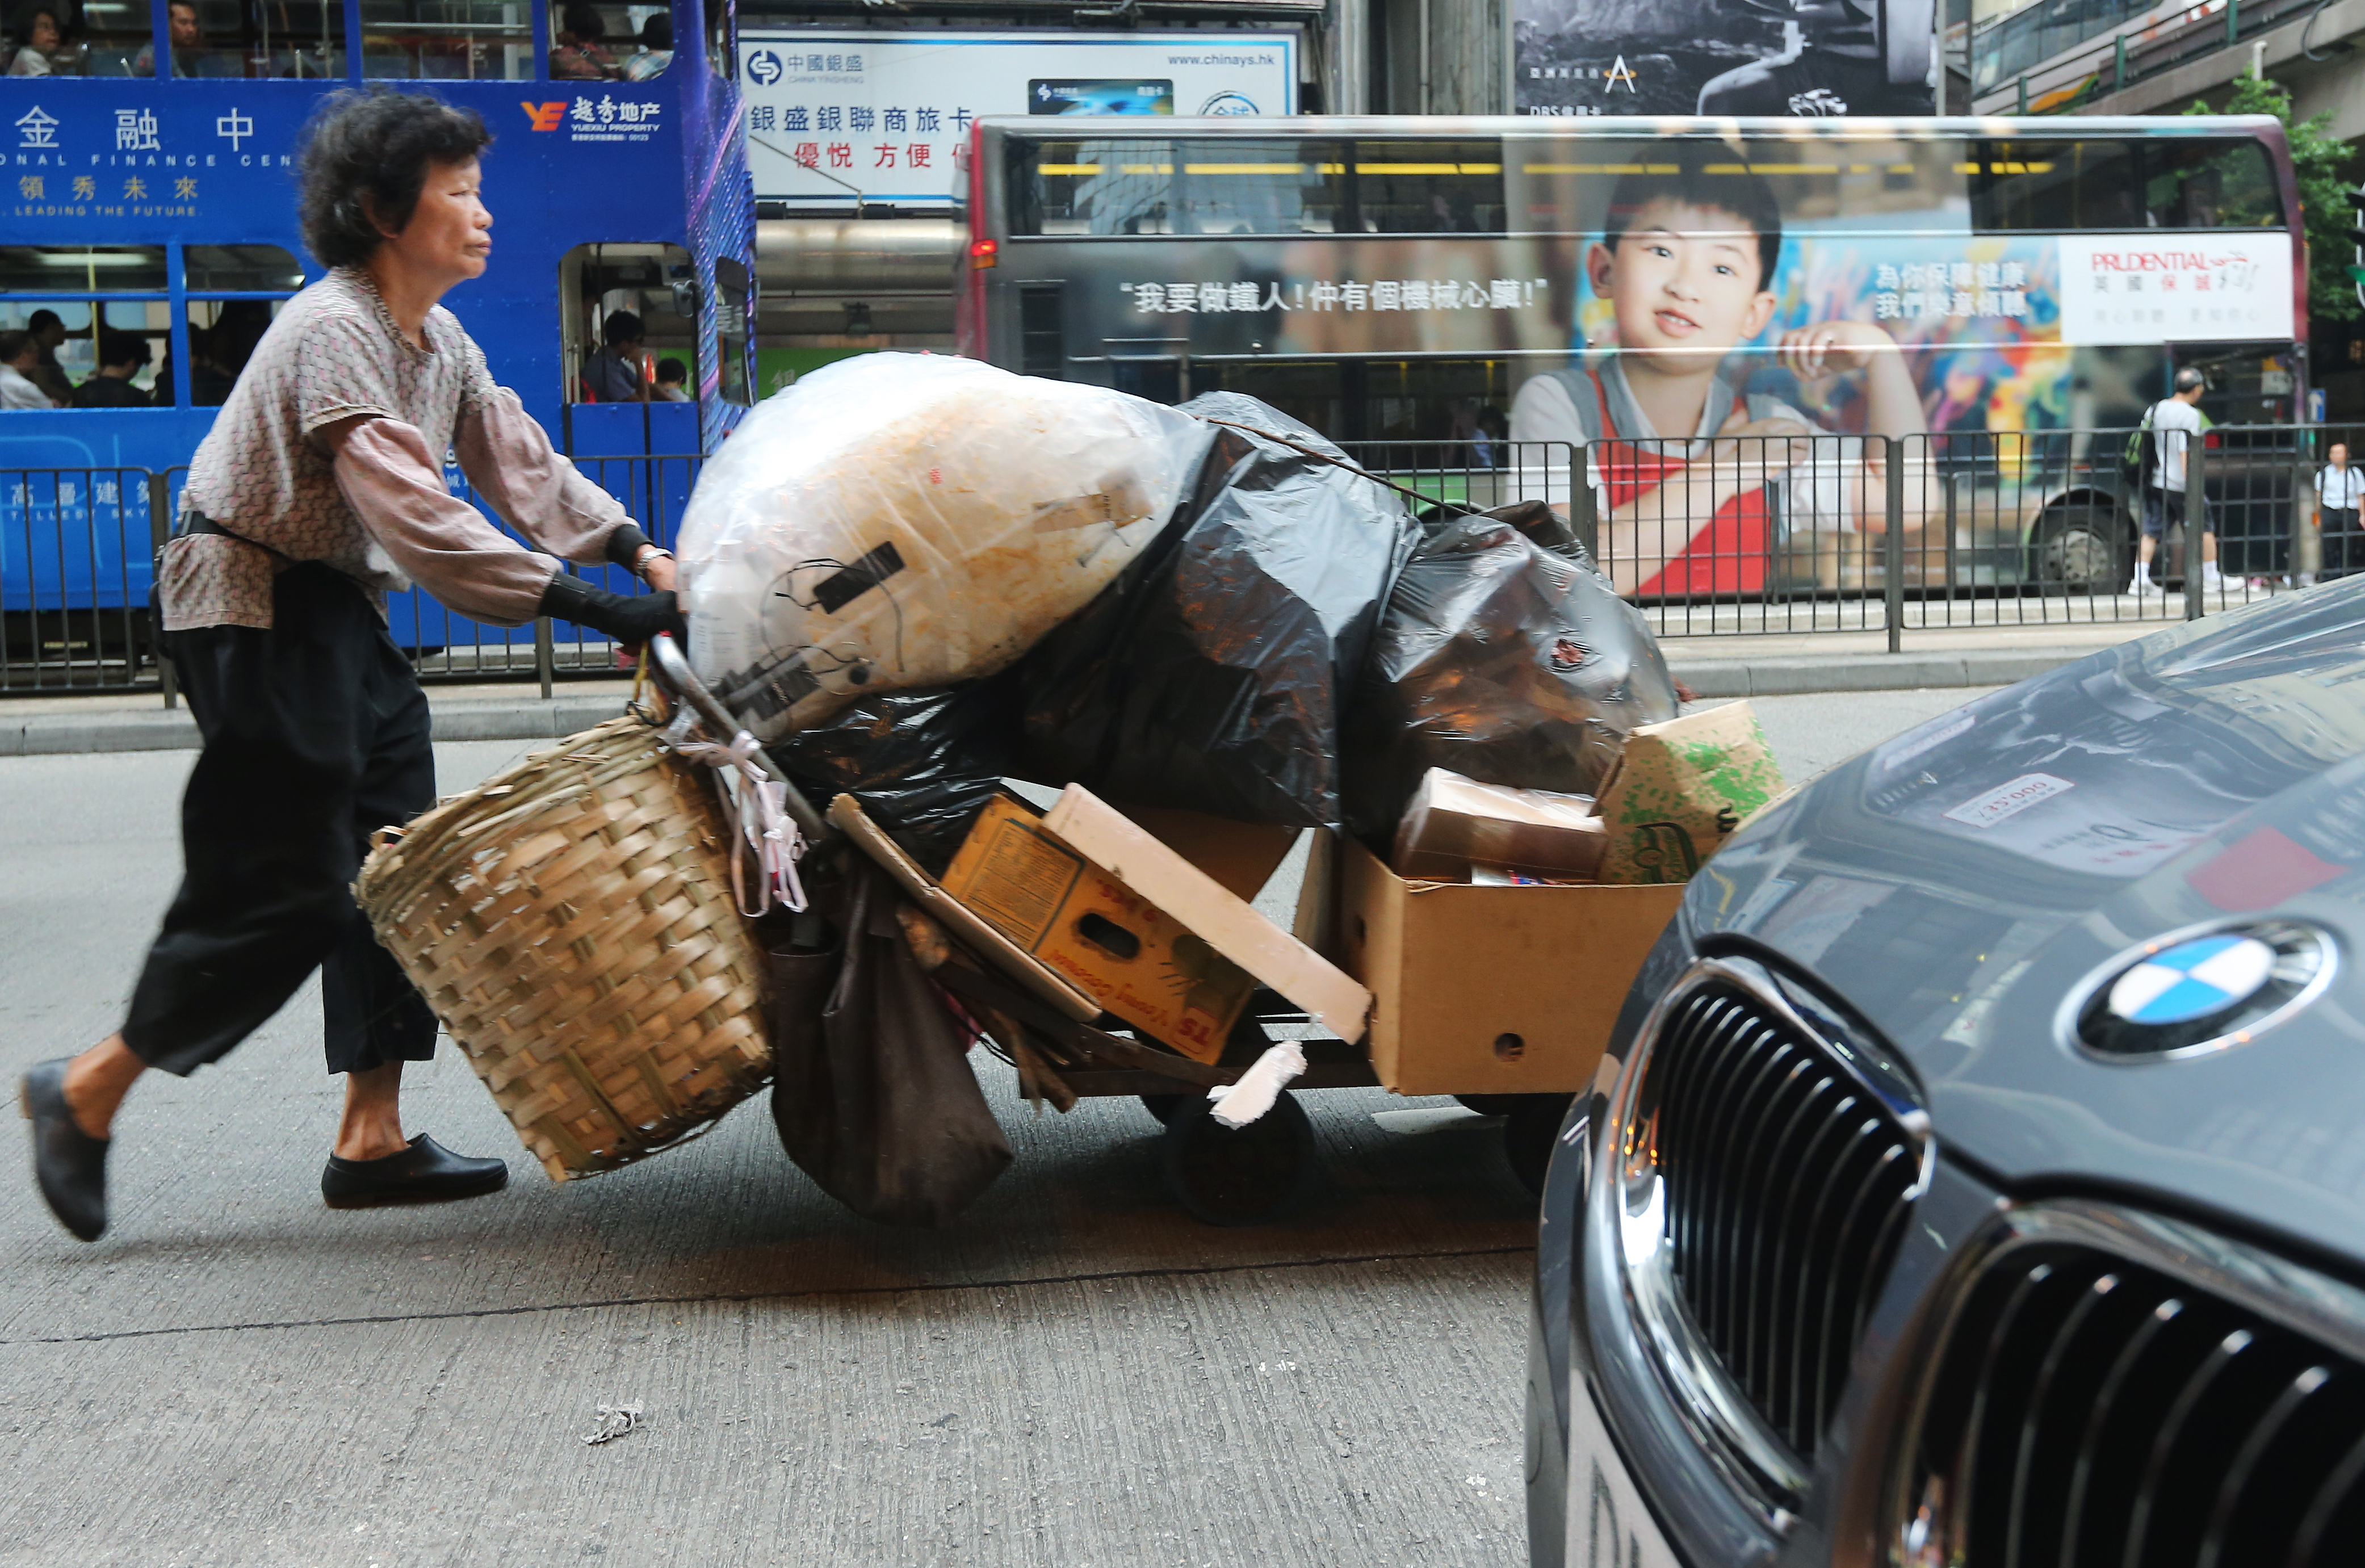 A woman pushes a trolley full of cardboard and plastic on a street of Wan Chai. The Census and Statistics Department released the results of the study on the household income distribution in Hong Kong, showing that the Gini Coefficient based on original household income of all domestic households in 2011 was 0.537, higher than 0.533 in 2006. 18JUN12